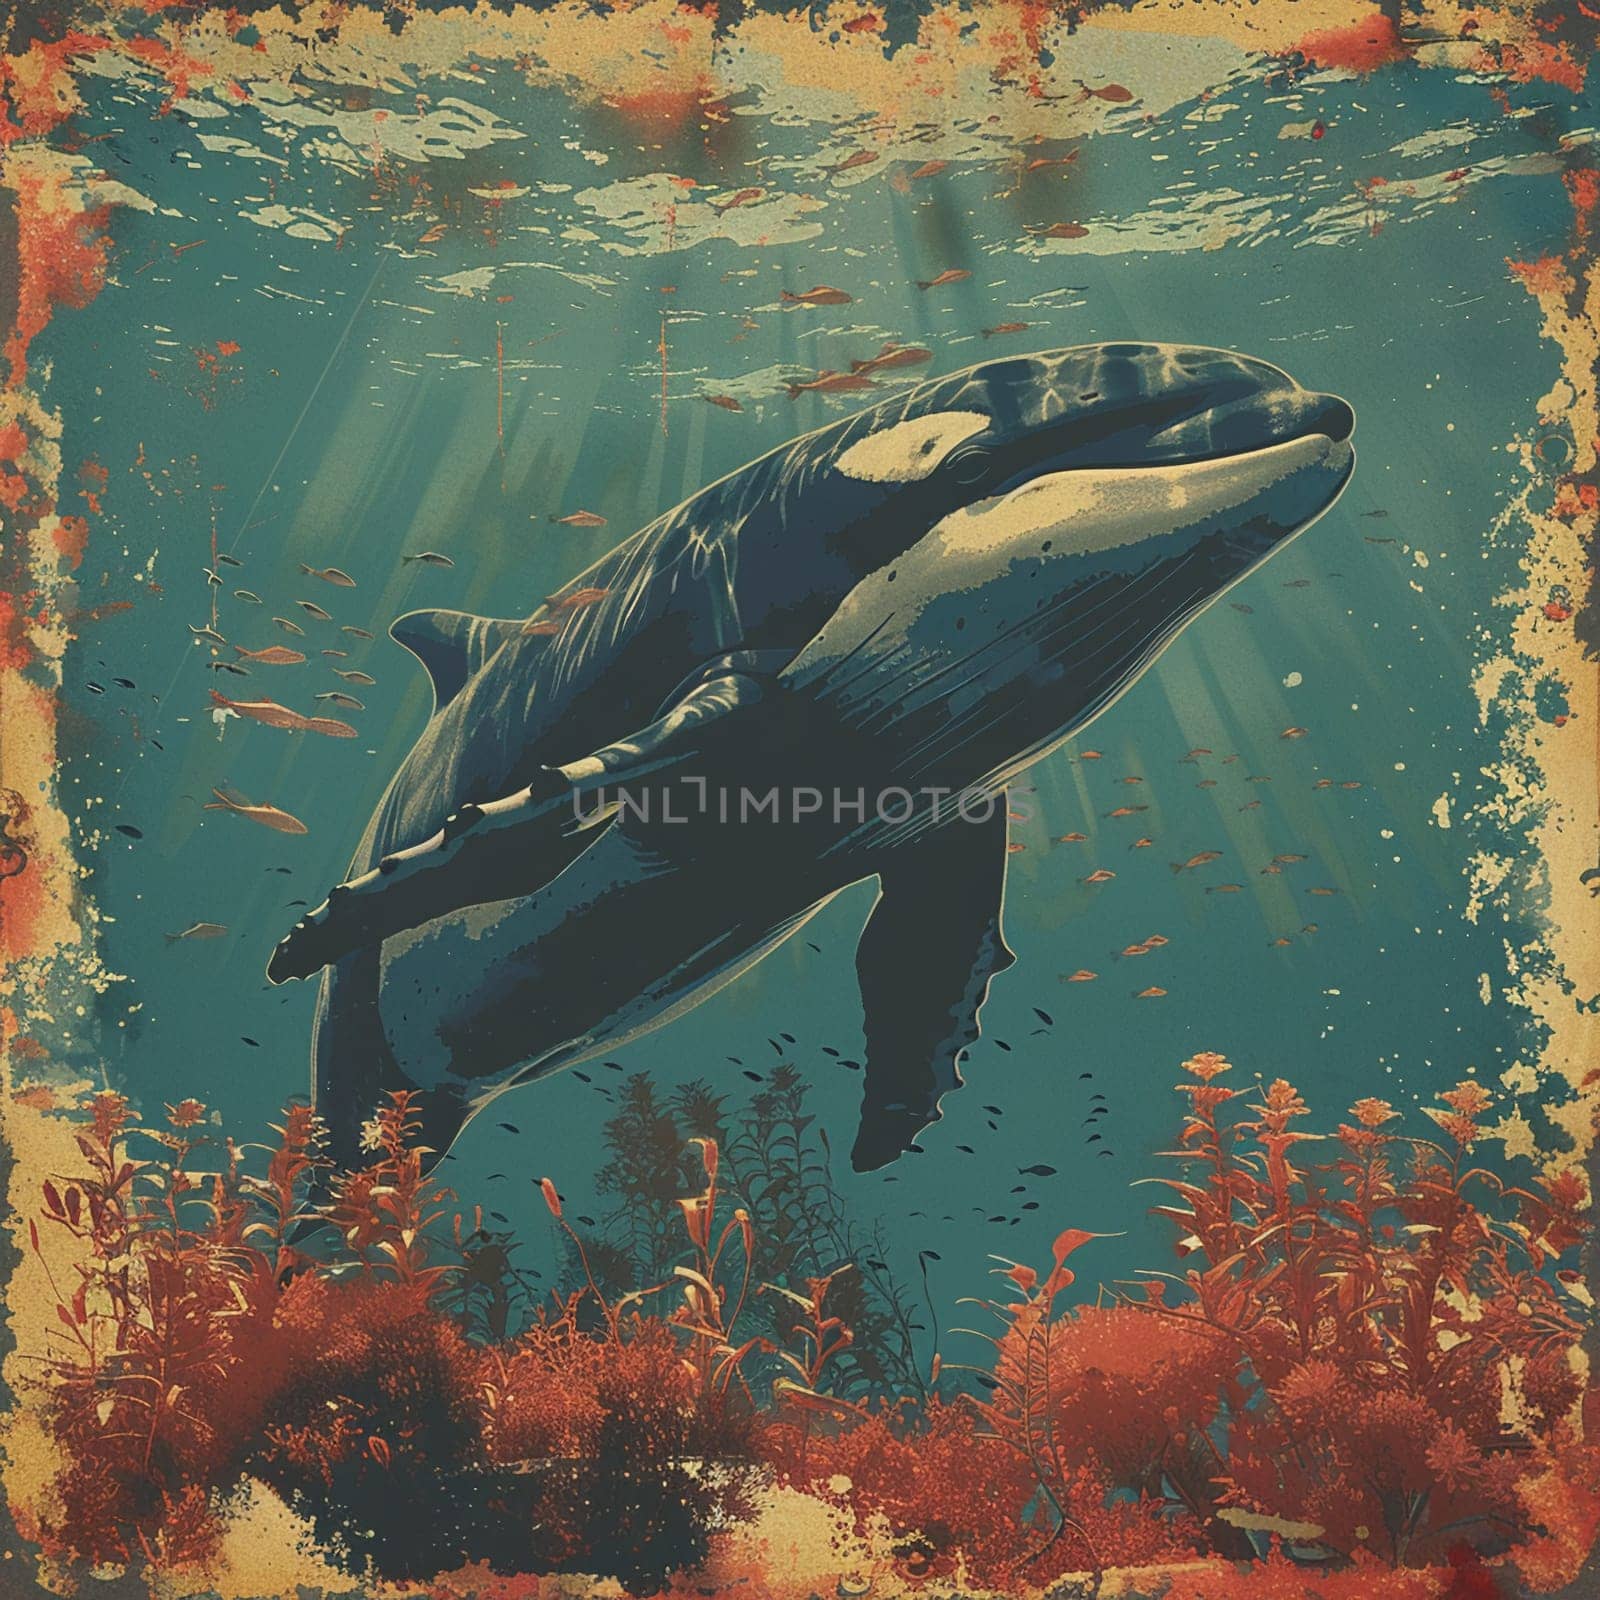 Vintage-style poster advocating for conservation of marine life on World Ocean Day. by Benzoix